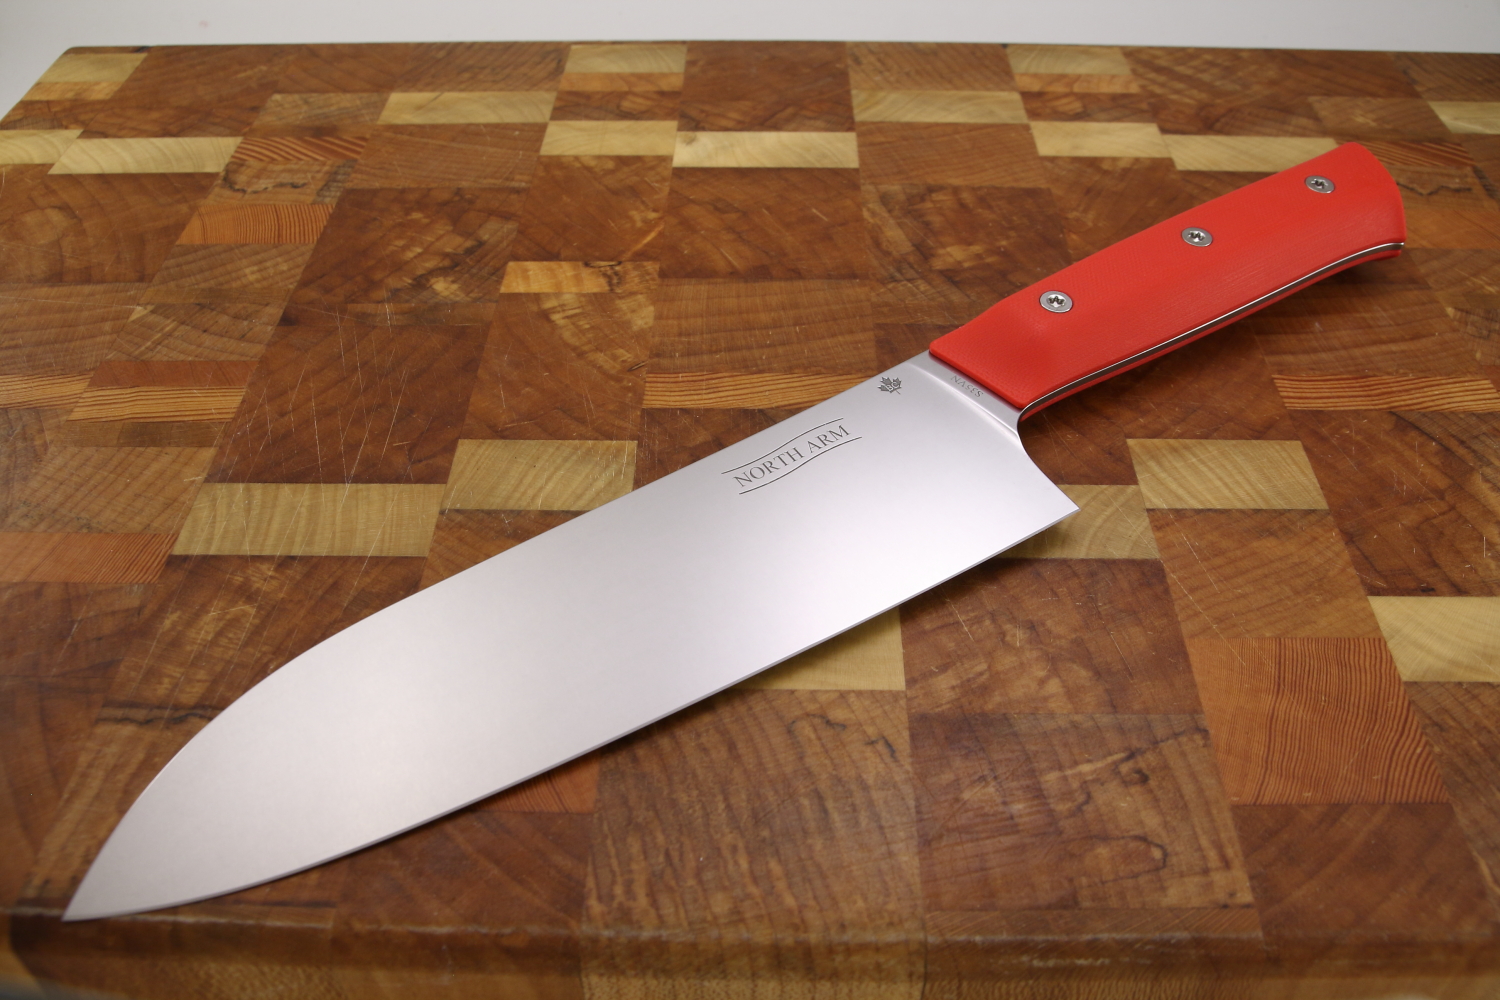 North_arm_Canadian_made_santoku_knife_cherry_red_g10